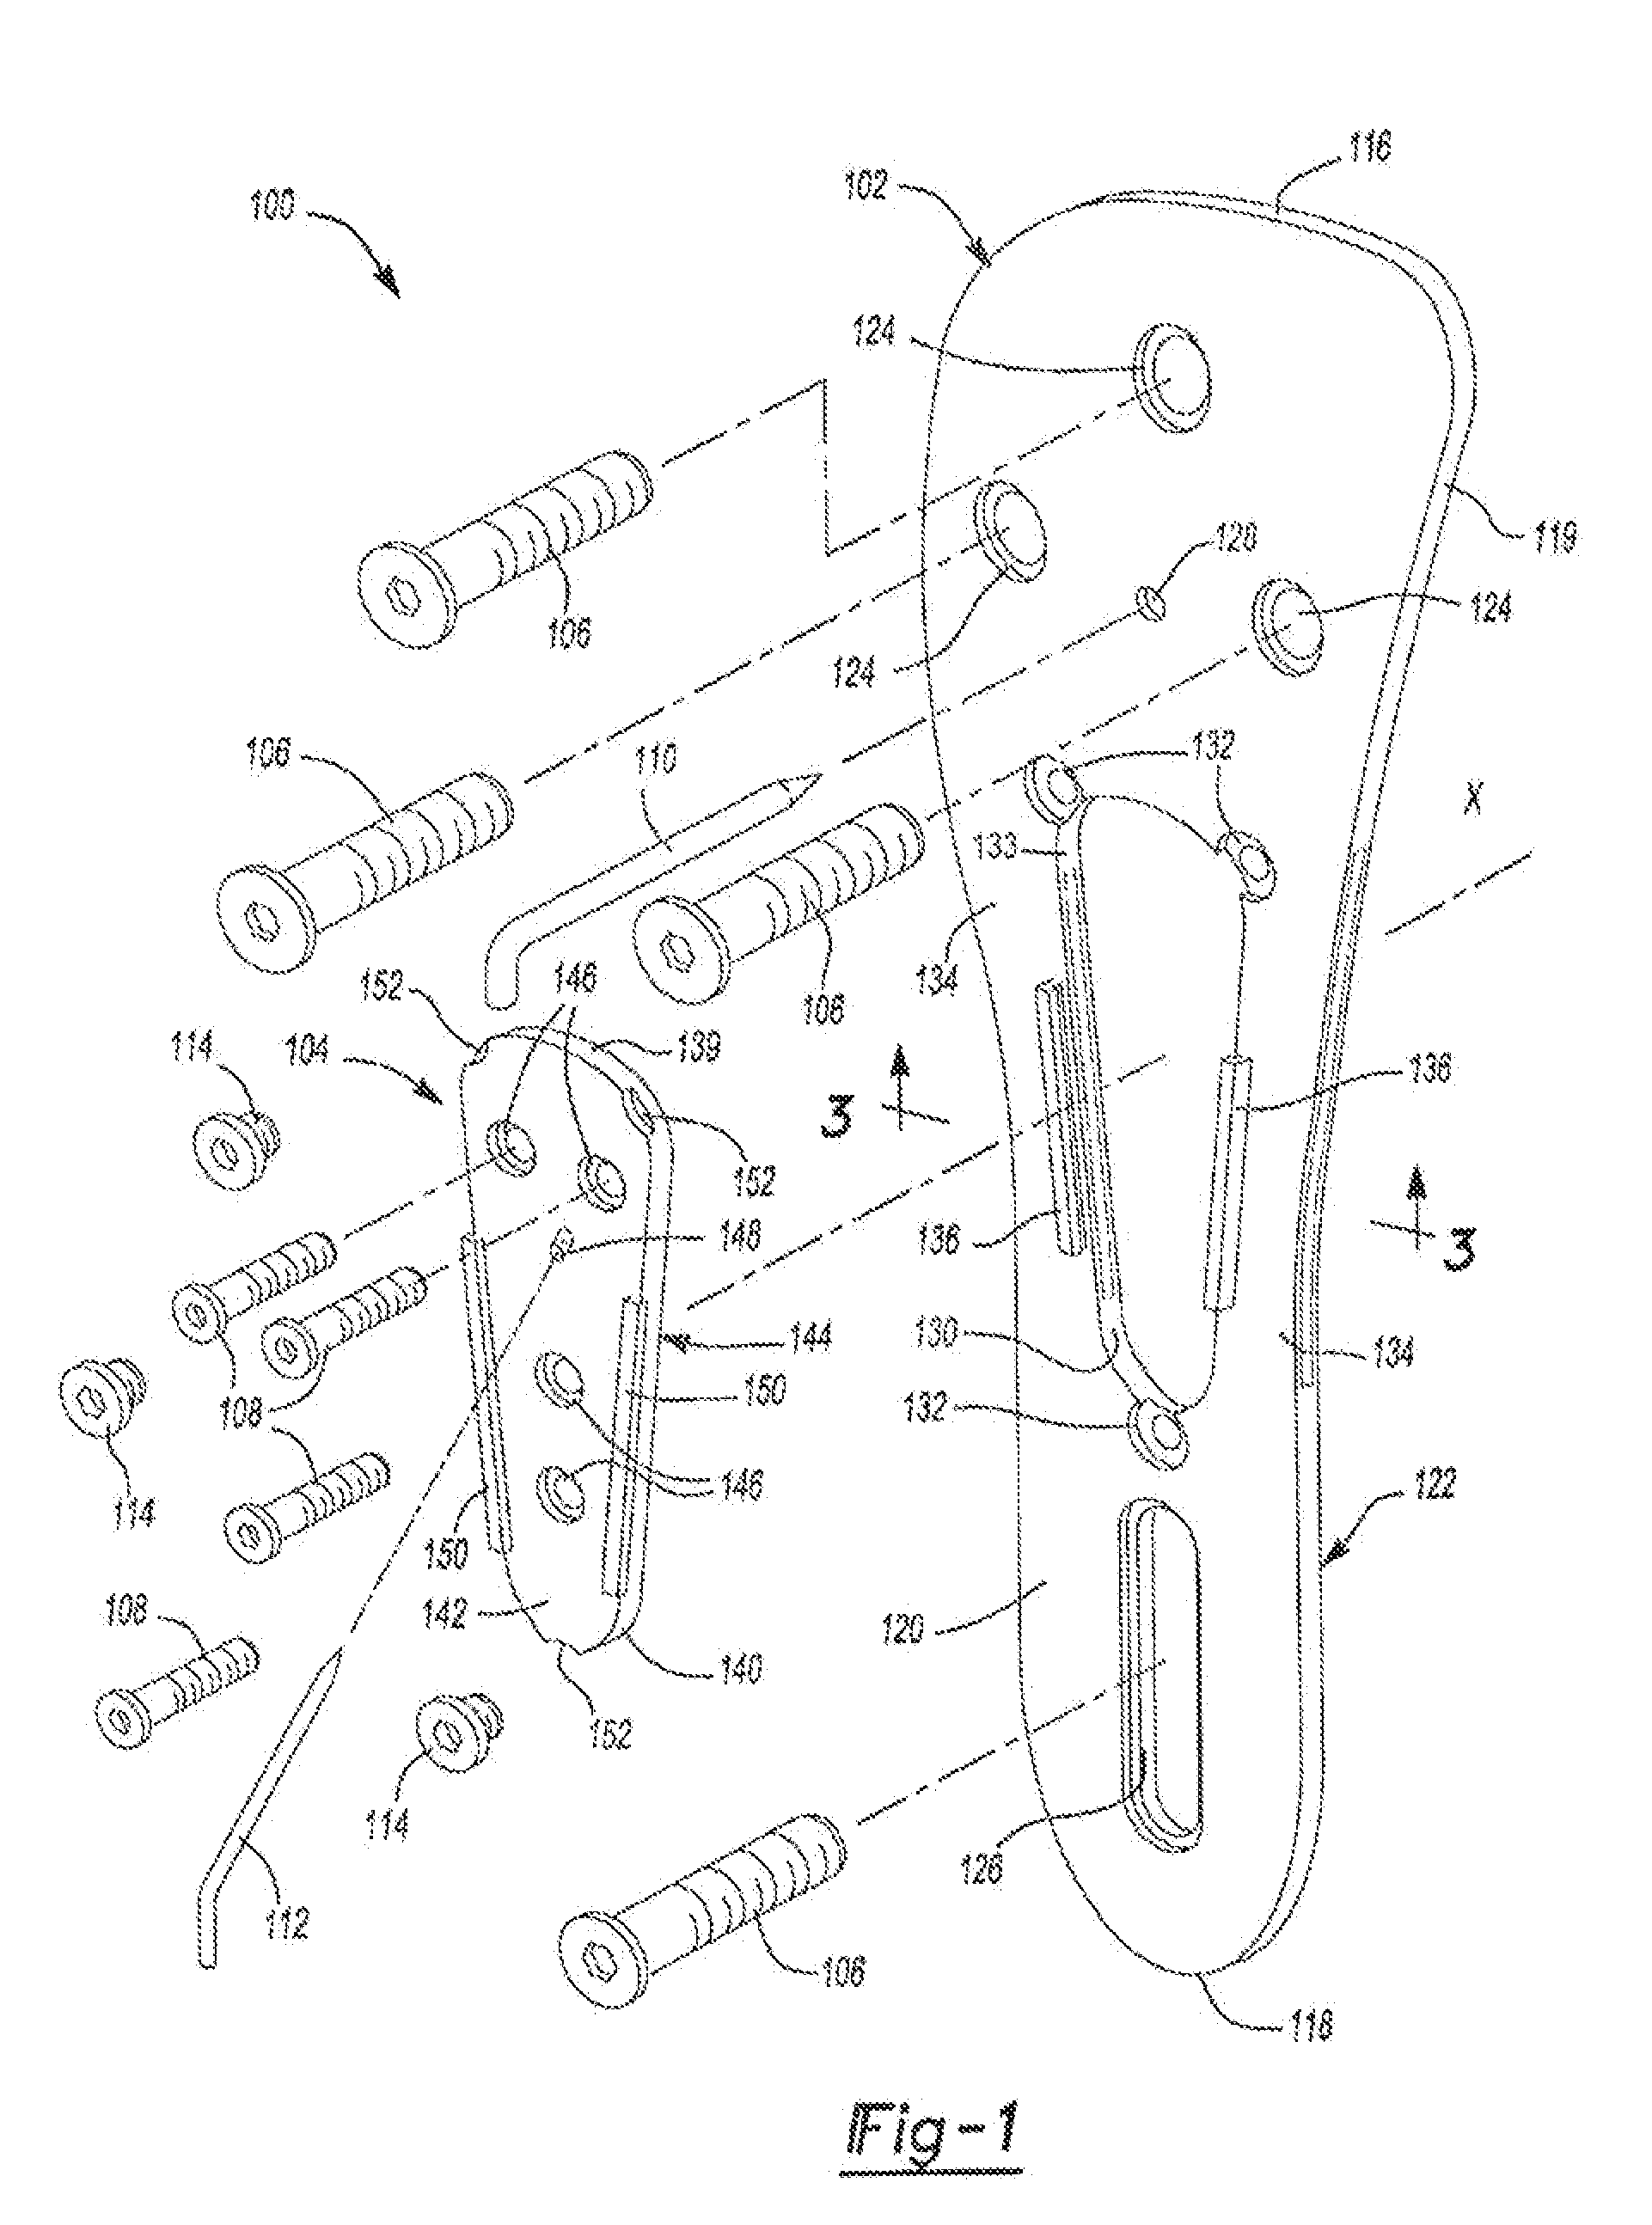 Method and apparatus for osteosynthesis